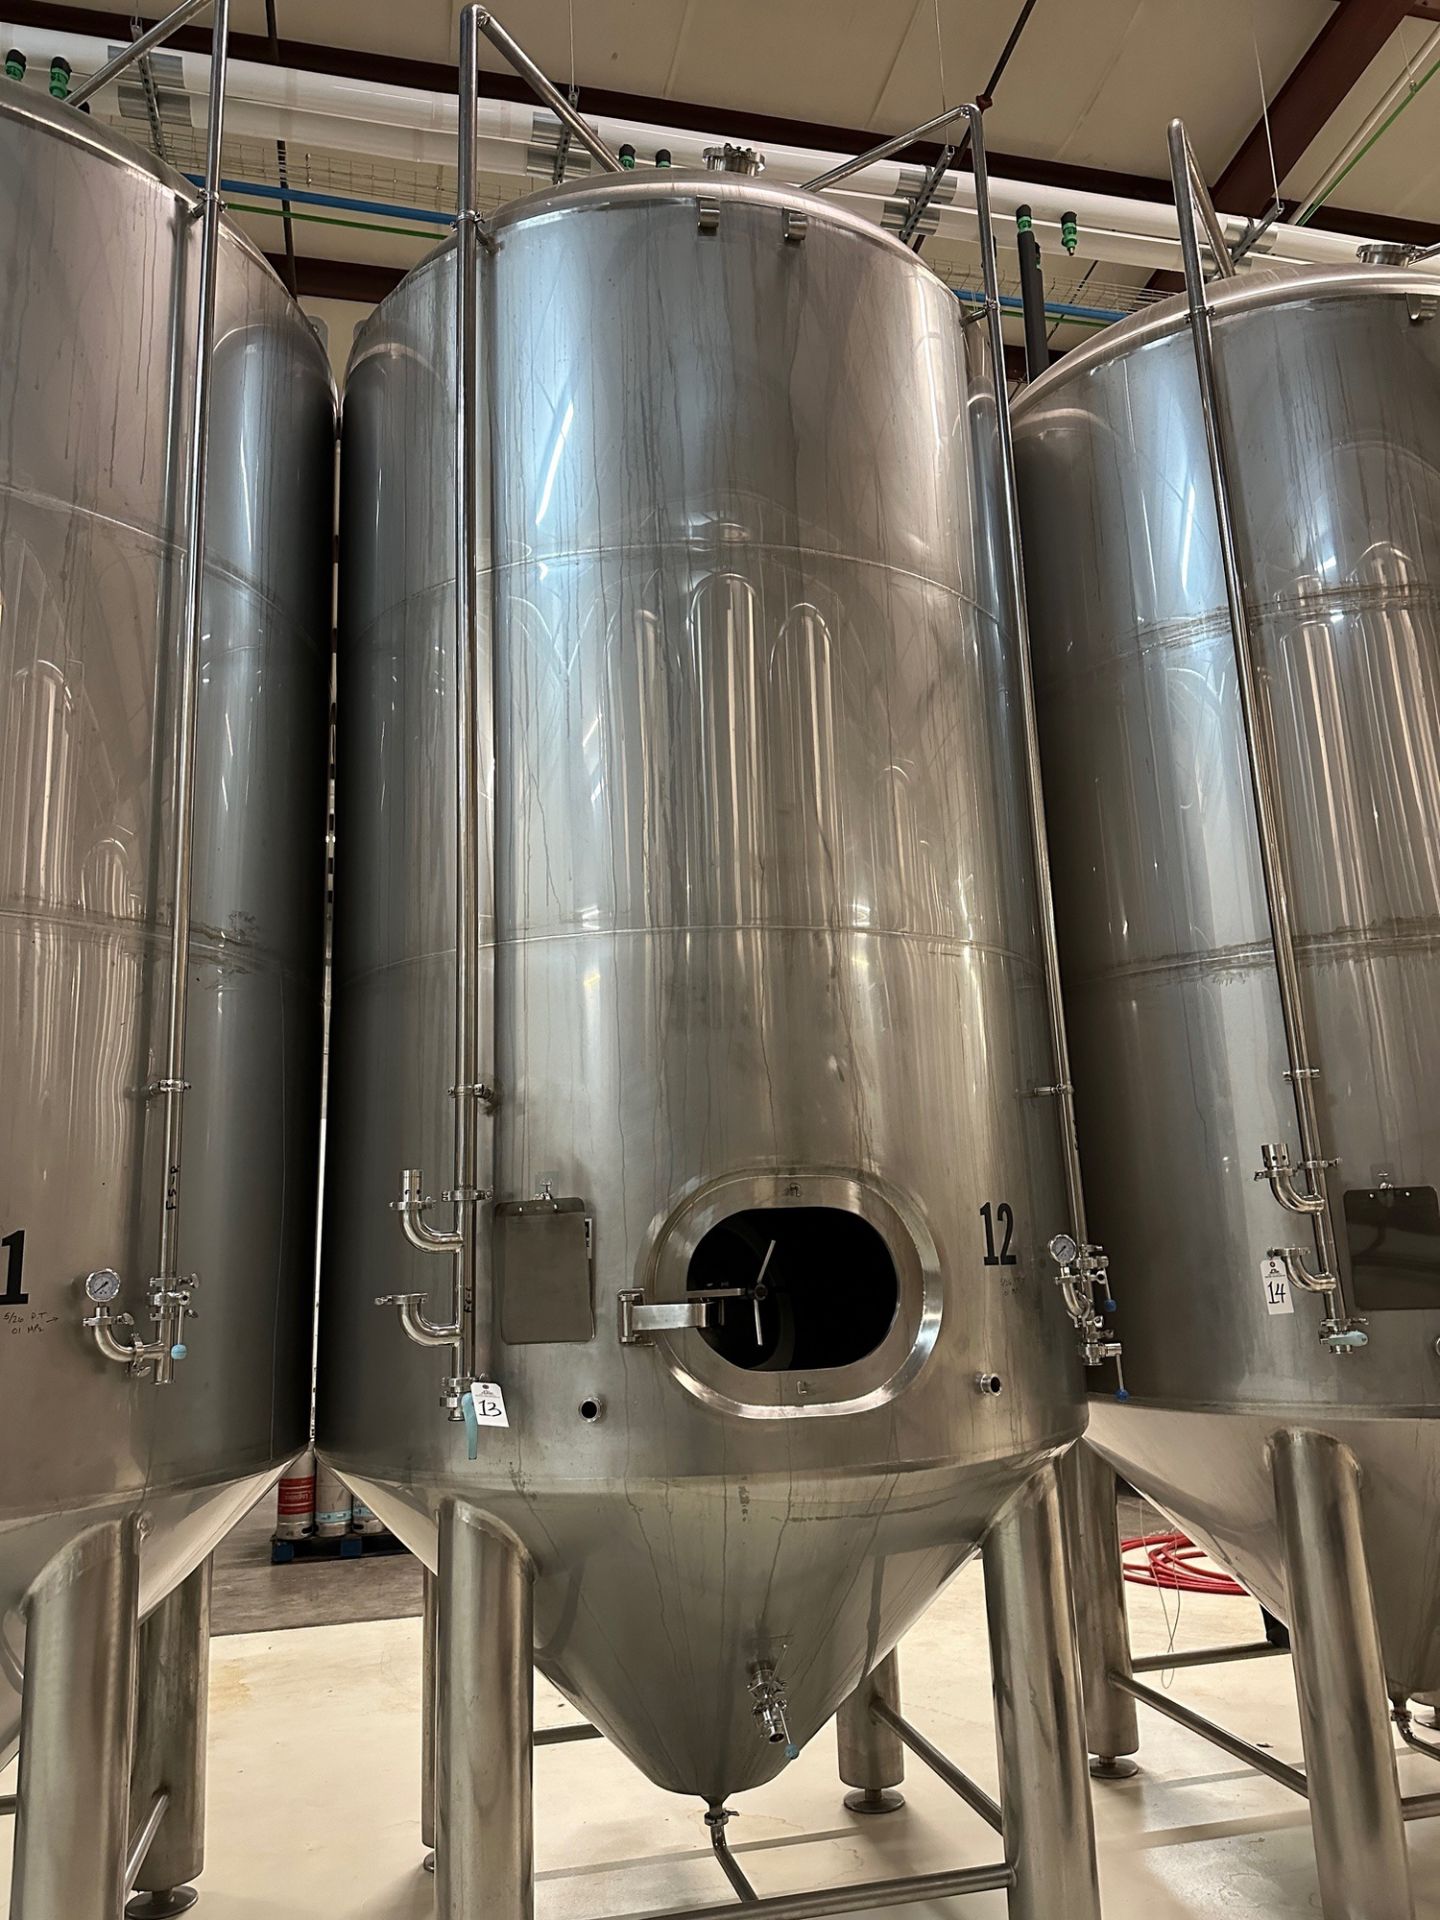 100 BBL Stainless Steel Fermentation Tank - Cone Bottom, Glycol Jacketed, Manway, Z | Rig Fee $1850